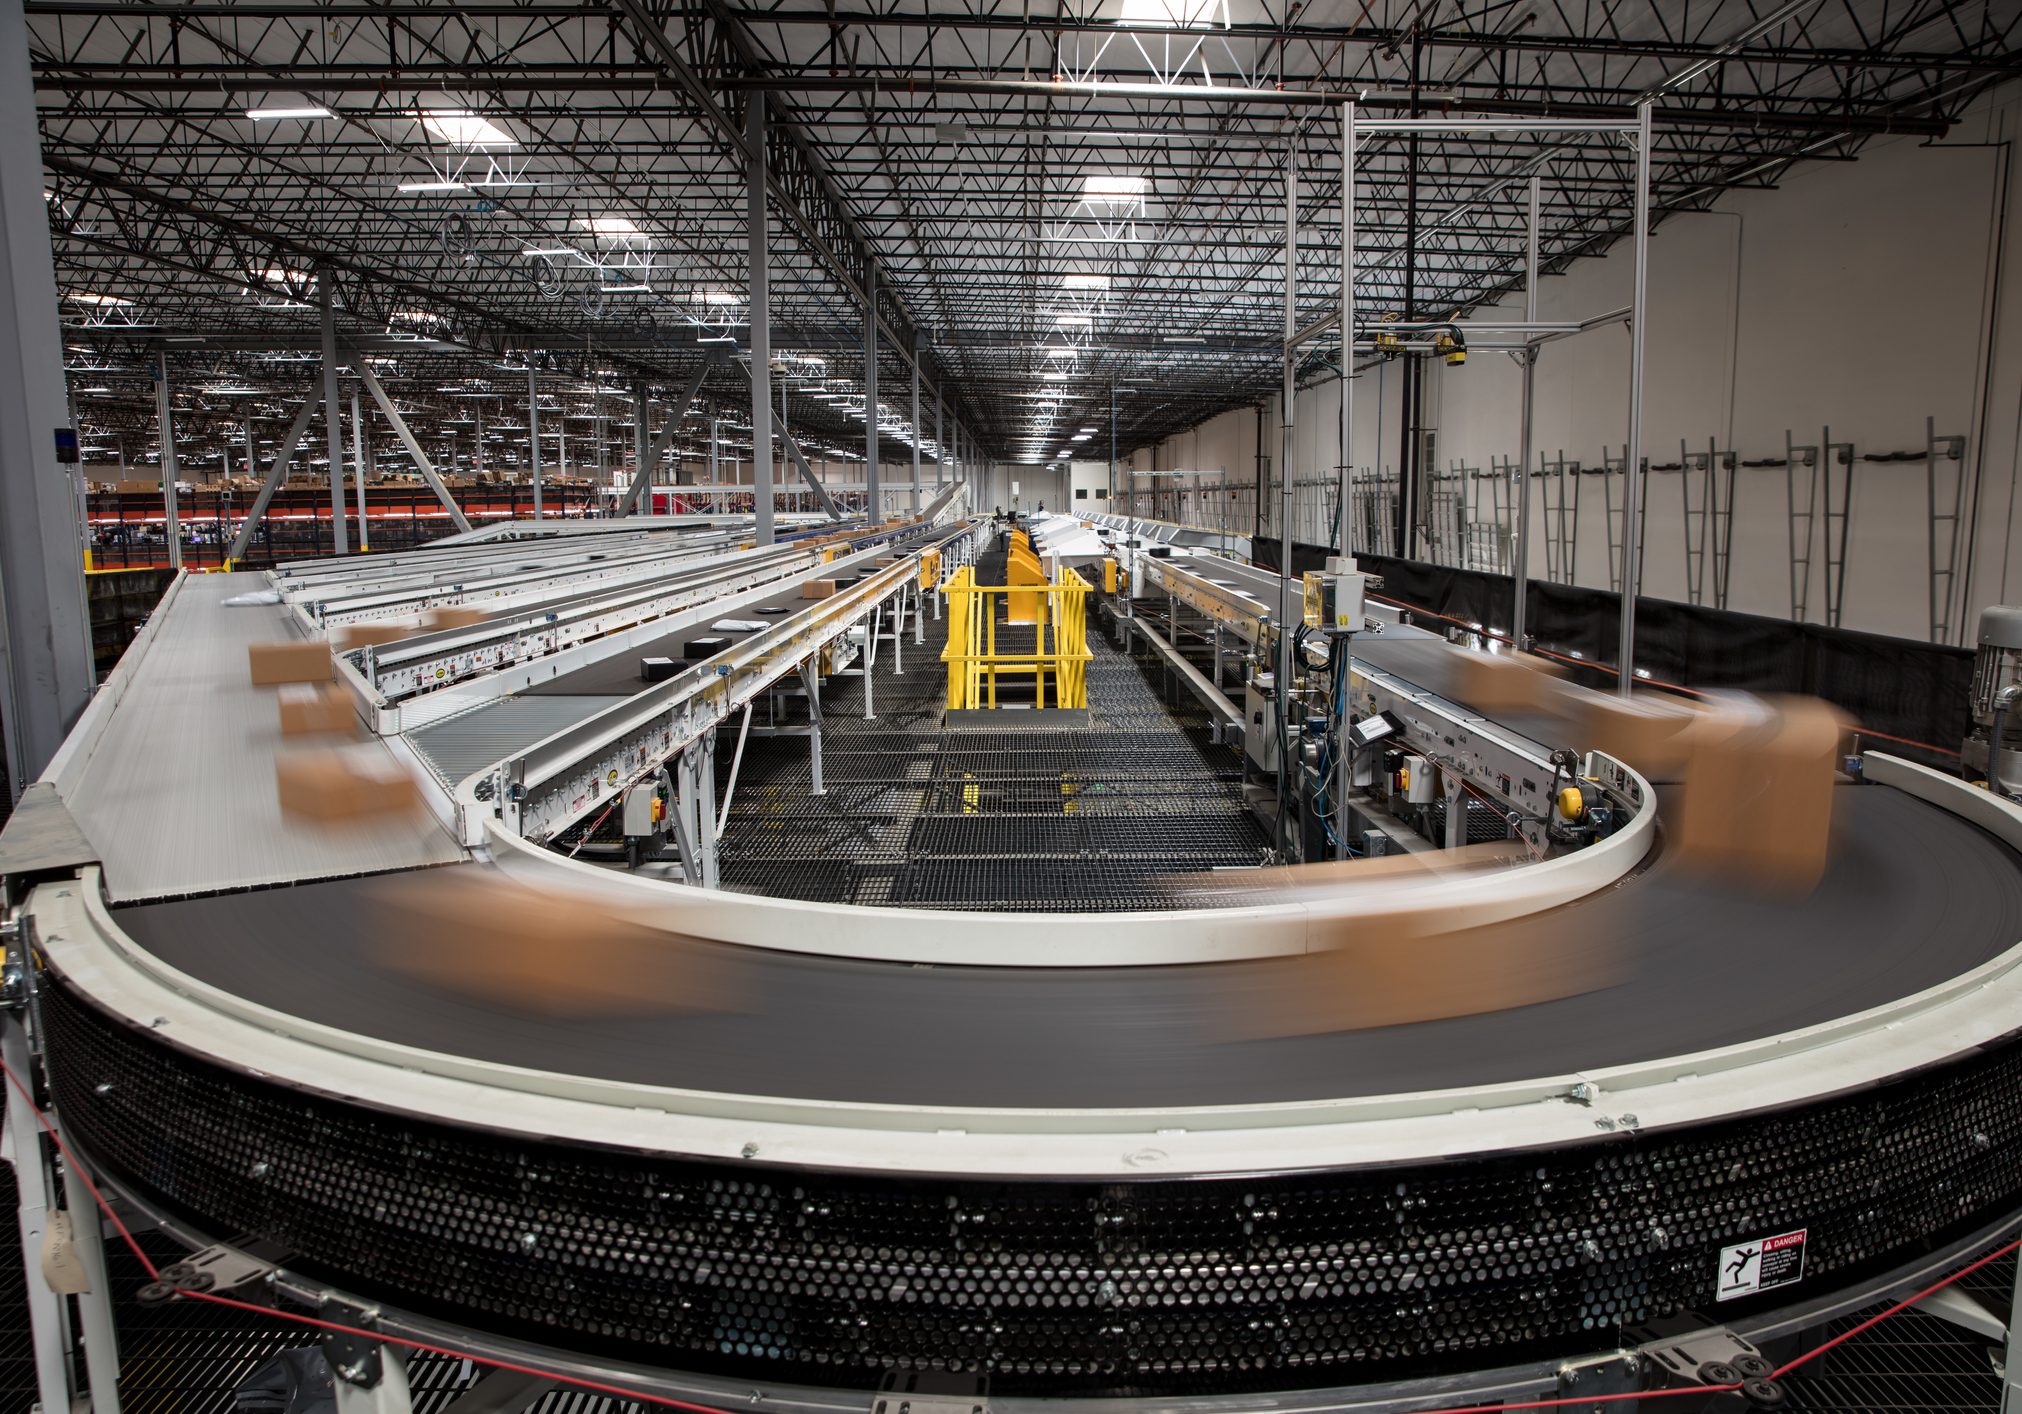 Packages blur as they rush past on the complex conveyor belt system that sorts them for delivery at a large fulfillment center.